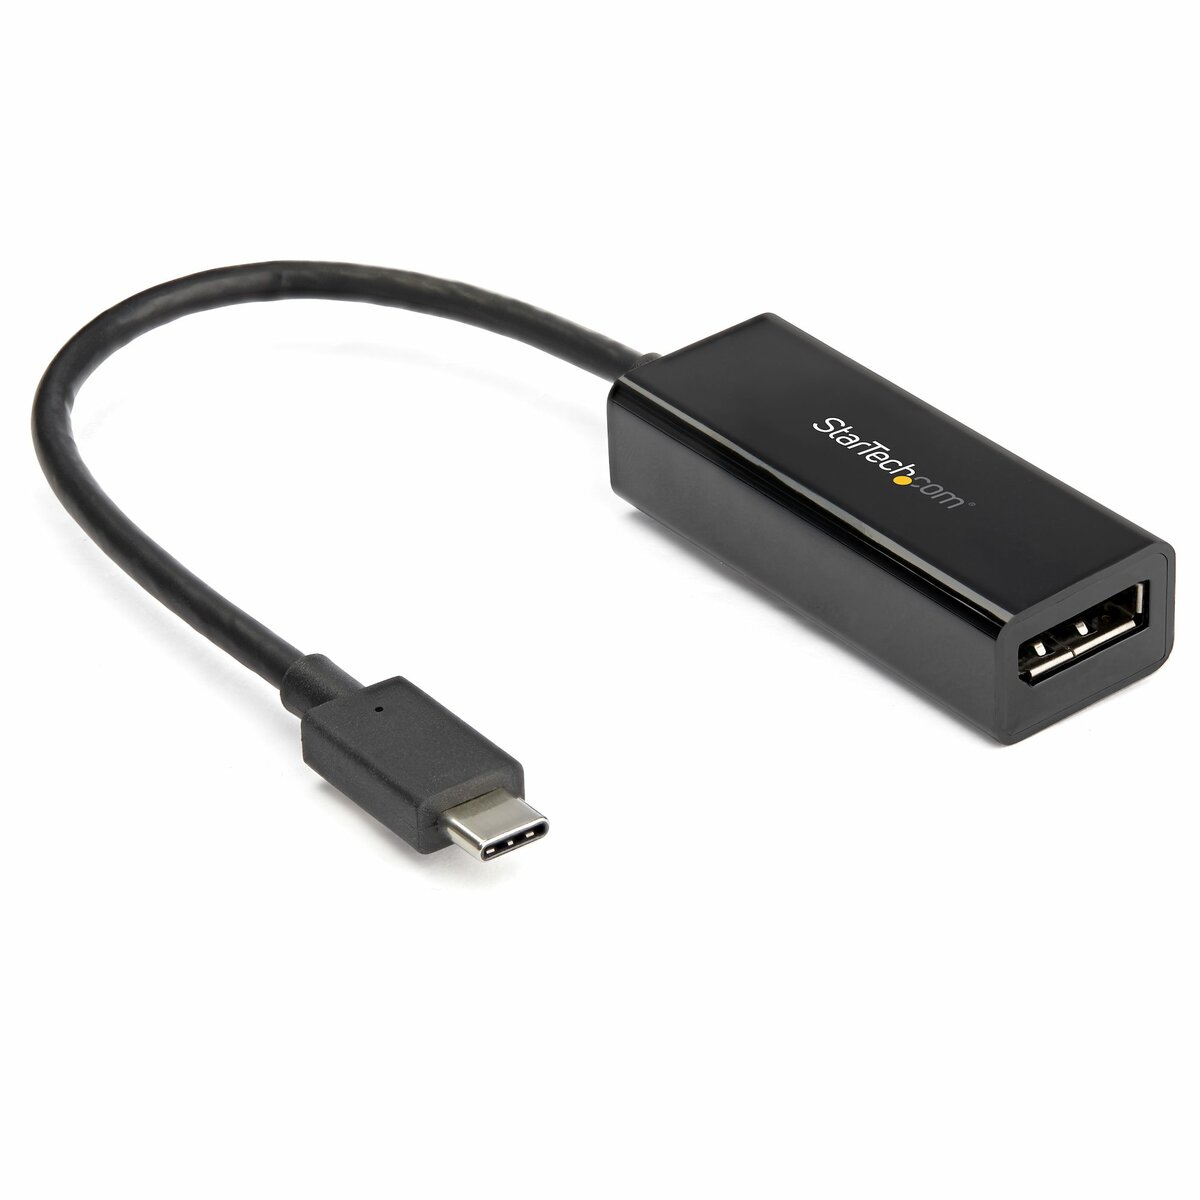 USB-C to HDMI cable for 4K/5K video viewing